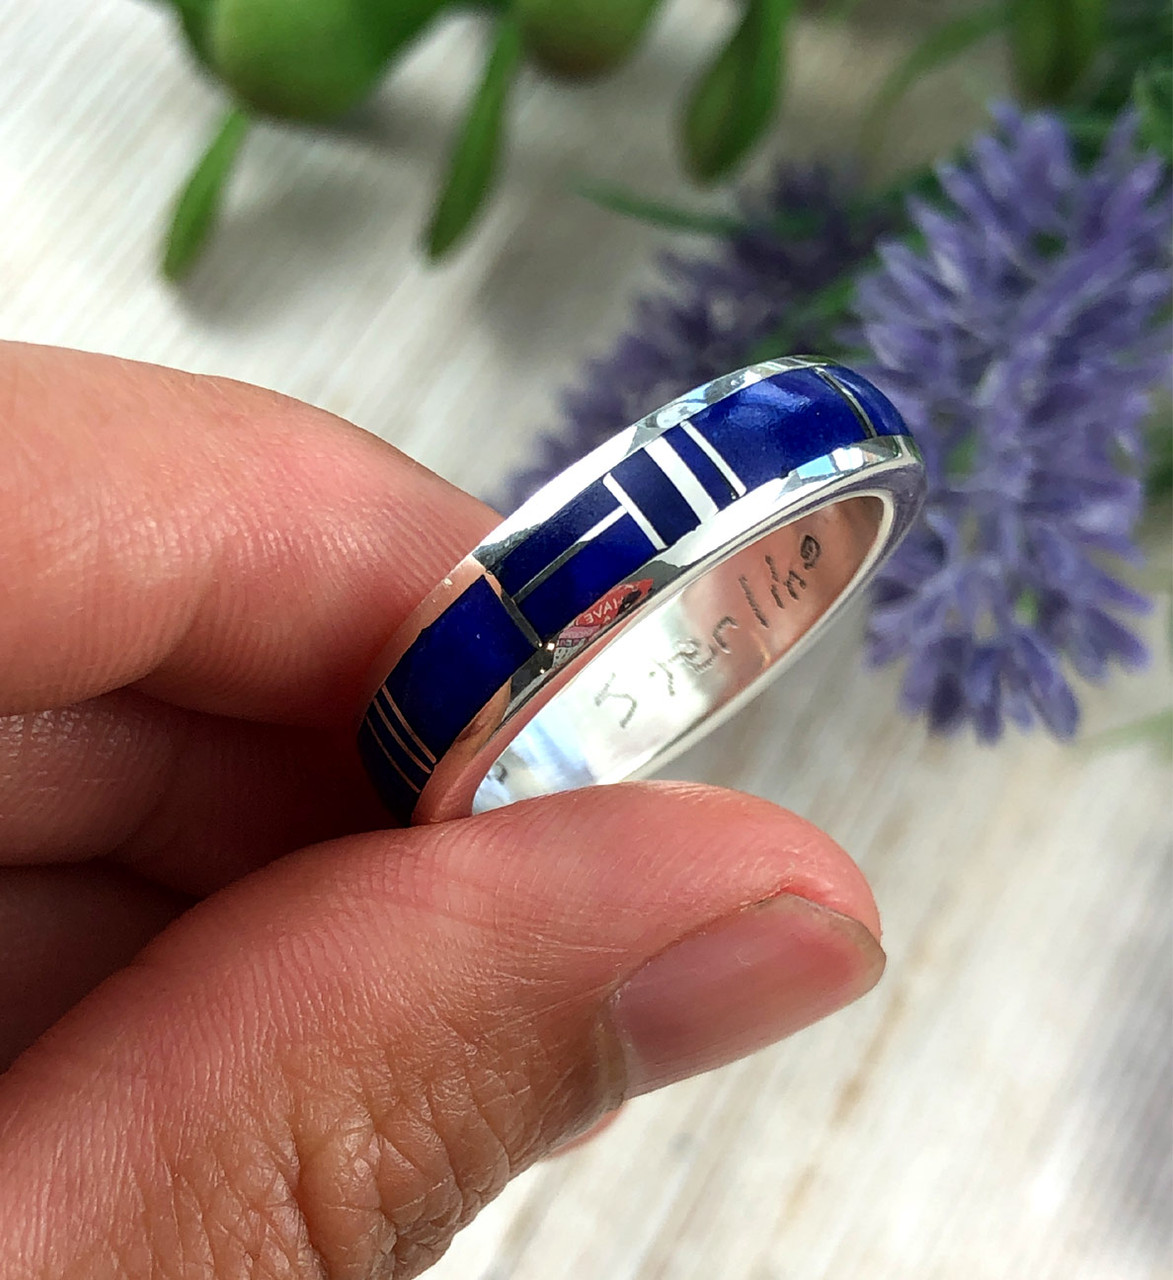 All Around Lapis and Silver Band Ring